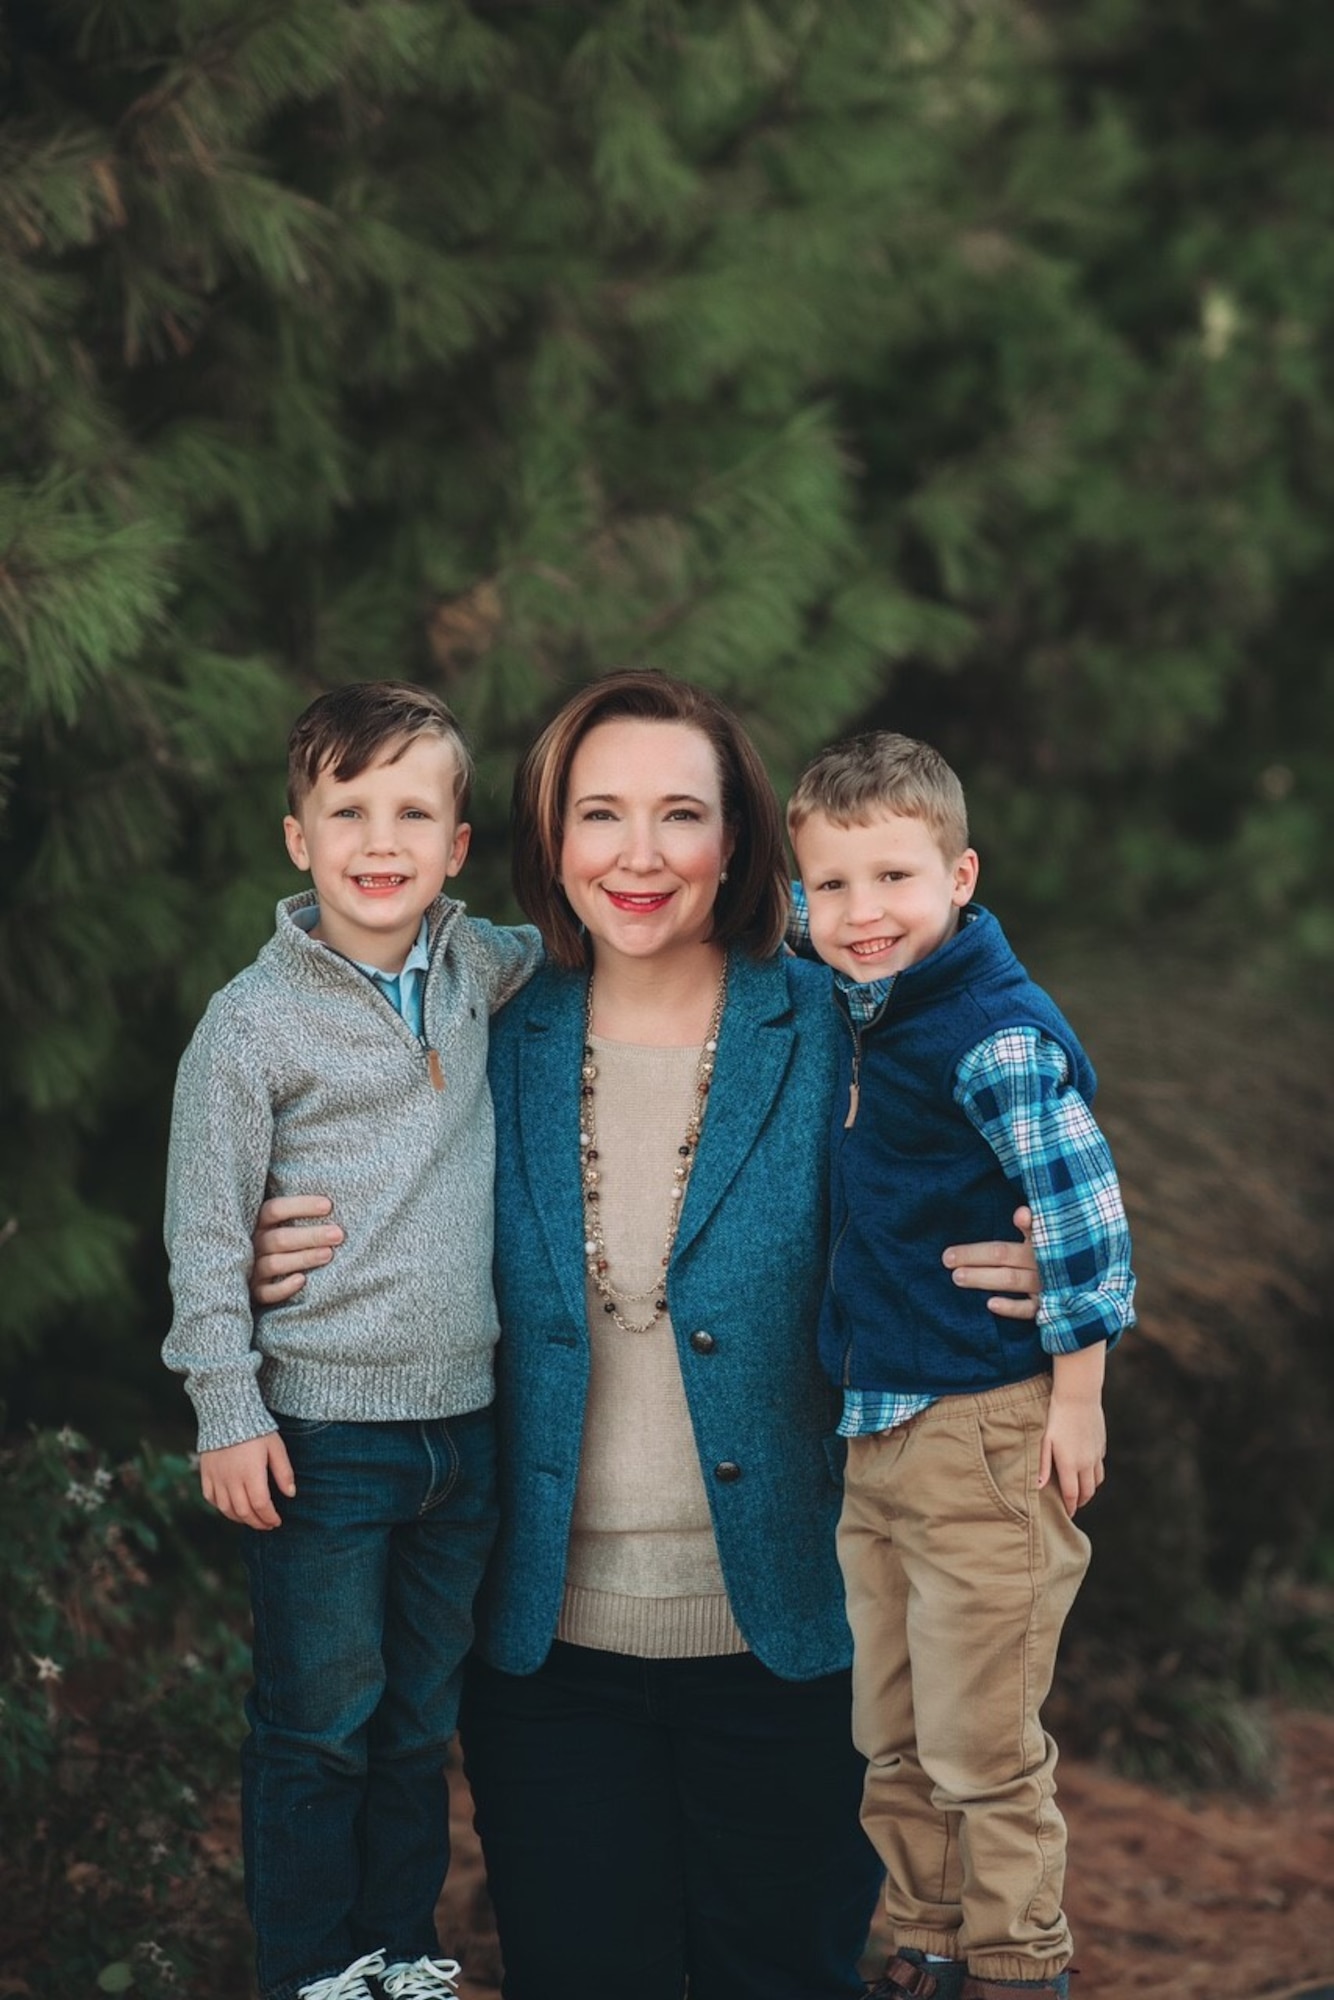 Jennifer Morgan,  the Deputy Program Executive Officer for Bombers with sons Thomas (left), and Grayson (right), both seven years old.